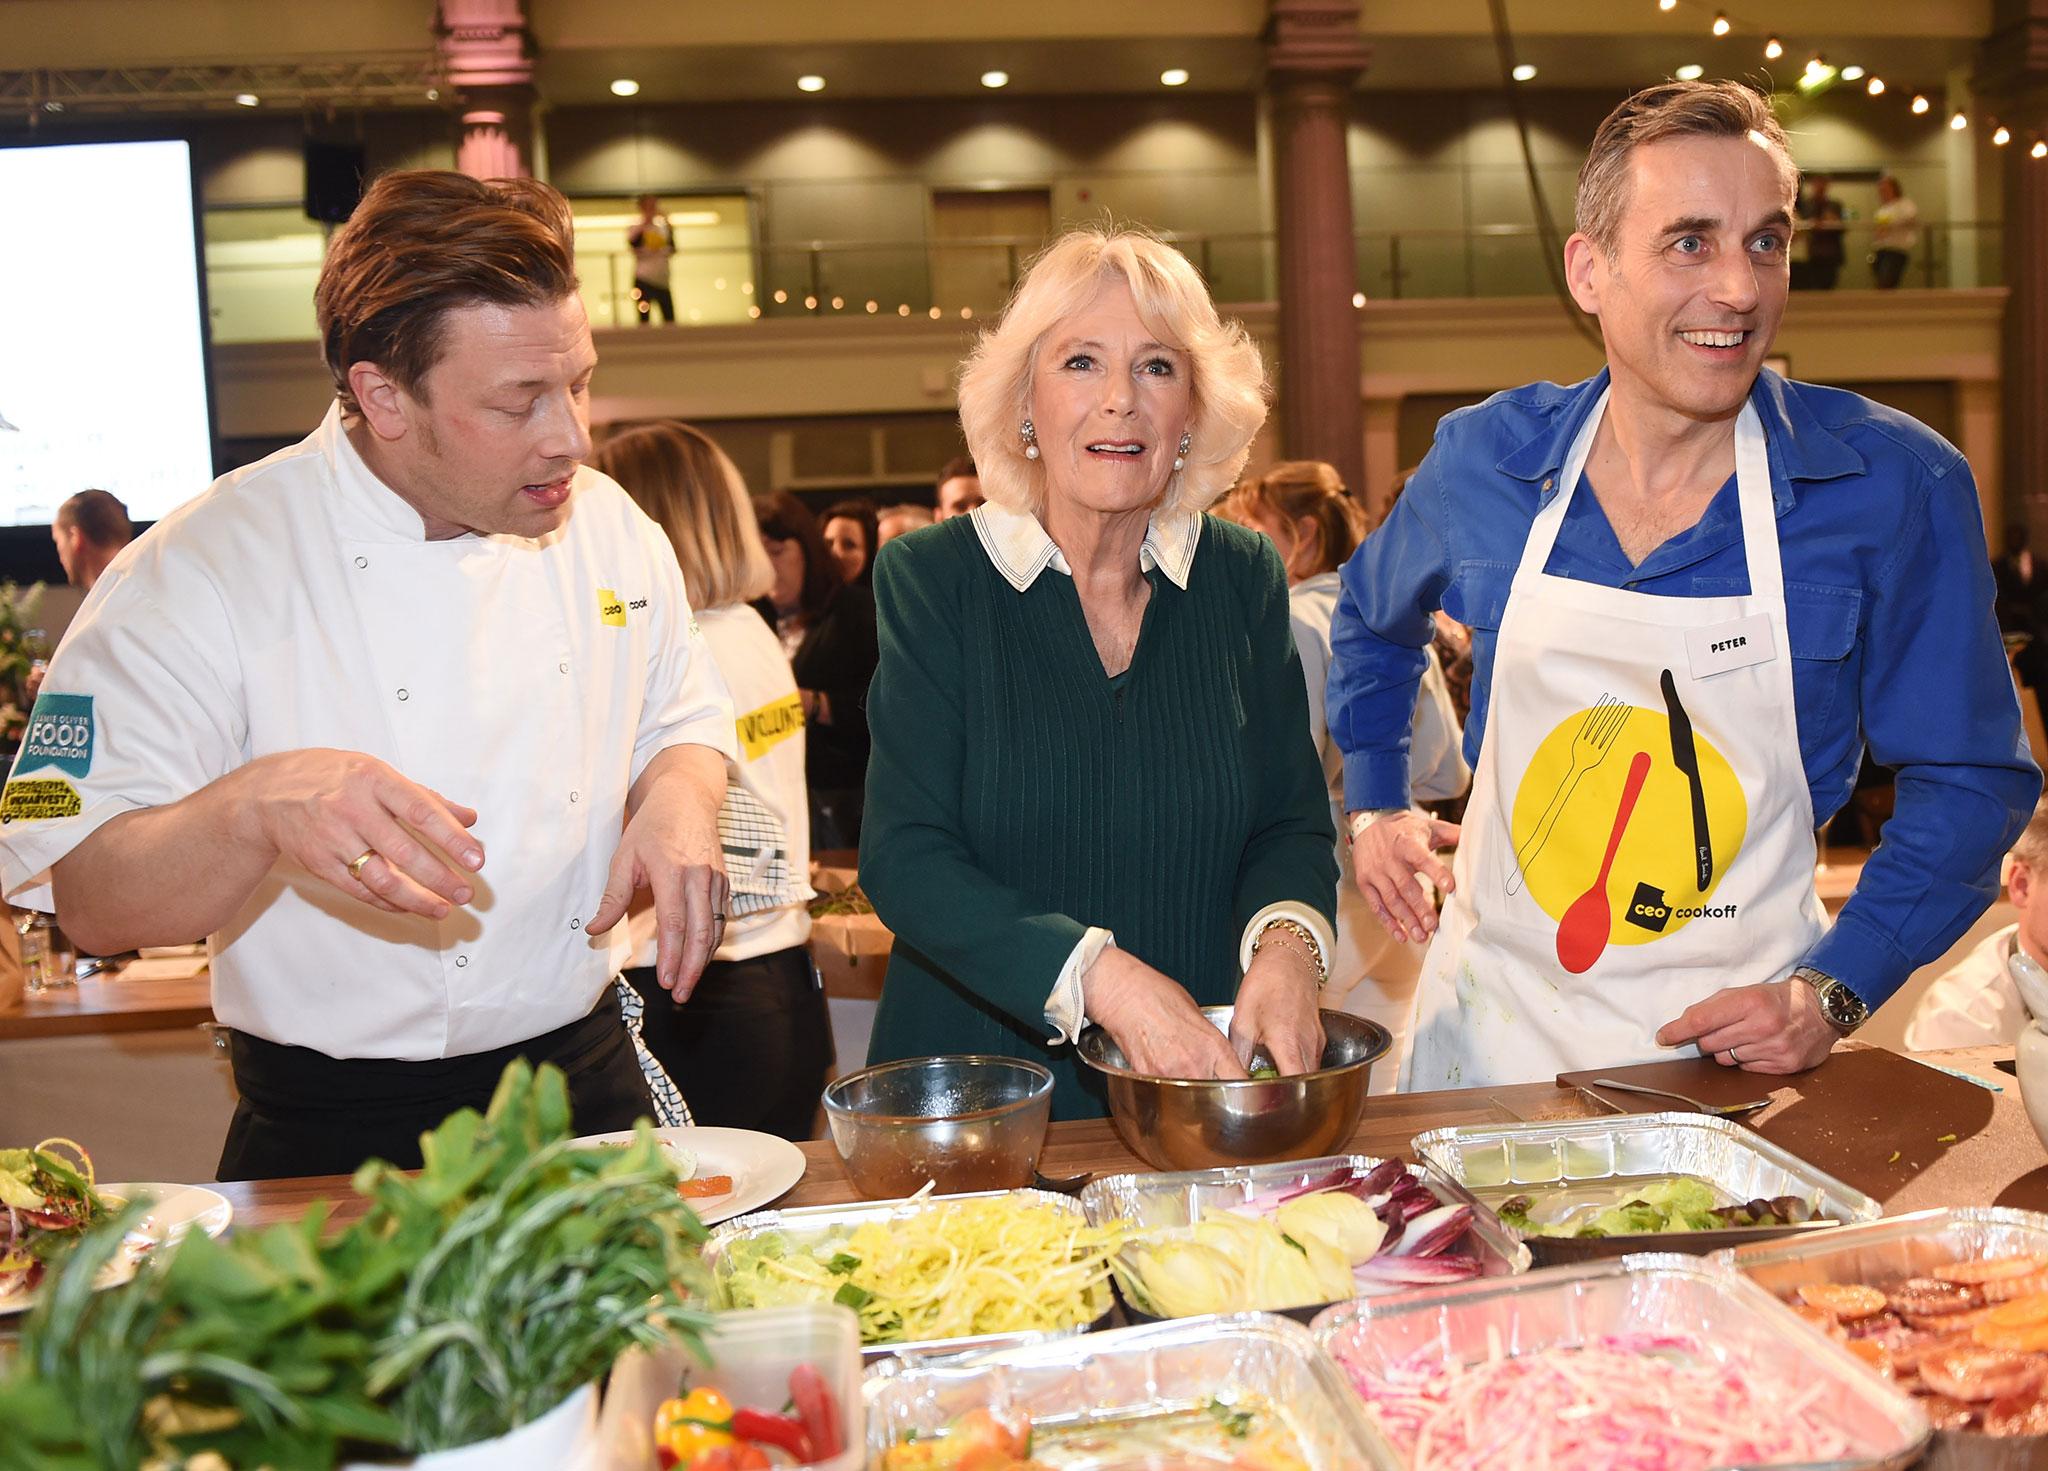 Peter Harding taking part in a cook-off for charity with Jamie Oliver and the Duchess of Cornwall, Camilla Parker-Bowles